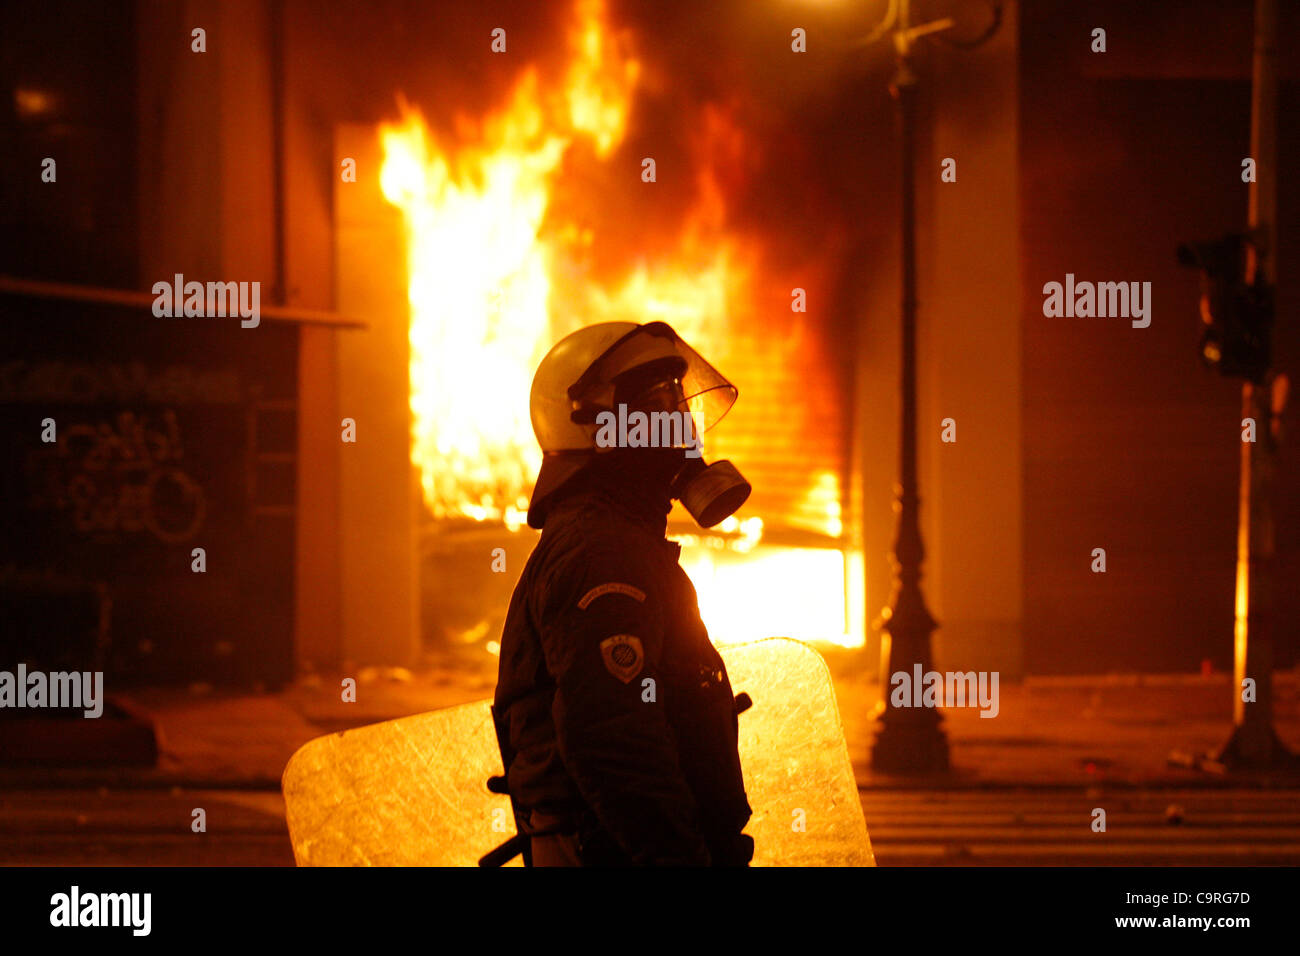 Feb. 12, 2012 - Athens, Greece - A riot policeman stands near a burning building set on fire during clashes as protesters fought with police, turning the center of Athens into a battle zone while lawmakers debated austerity measures. (Credit Image: © Aristidis Vafeiadakis/ZUMAPRESS.com) Stock Photo